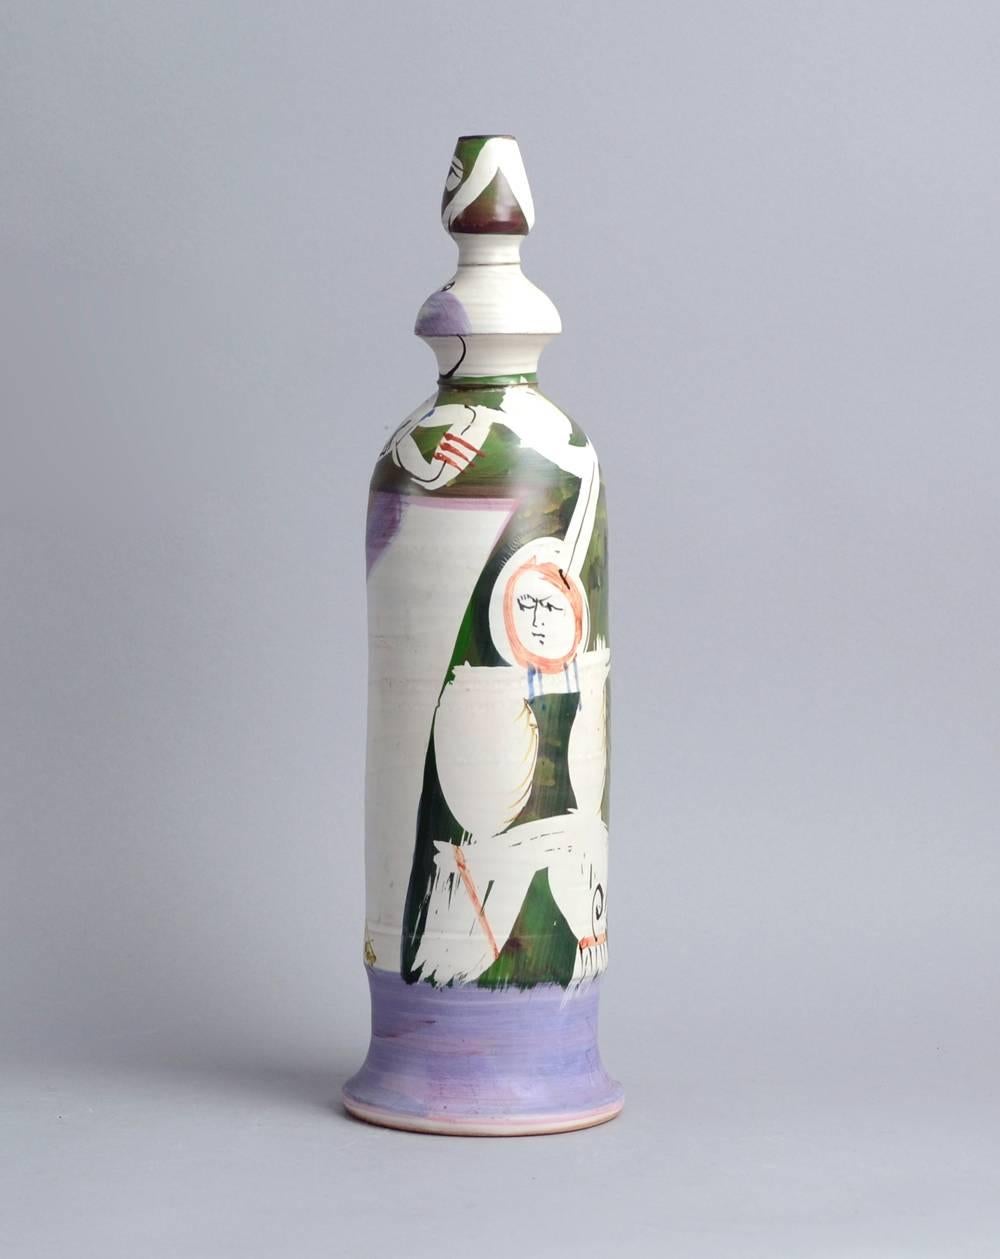 Gilbert Portanier, own studio, France
Unique stoneware vase with hand-painted decoration with matte white, purple, green and brown glaze, 1981.
Measures: Height 15 3/4